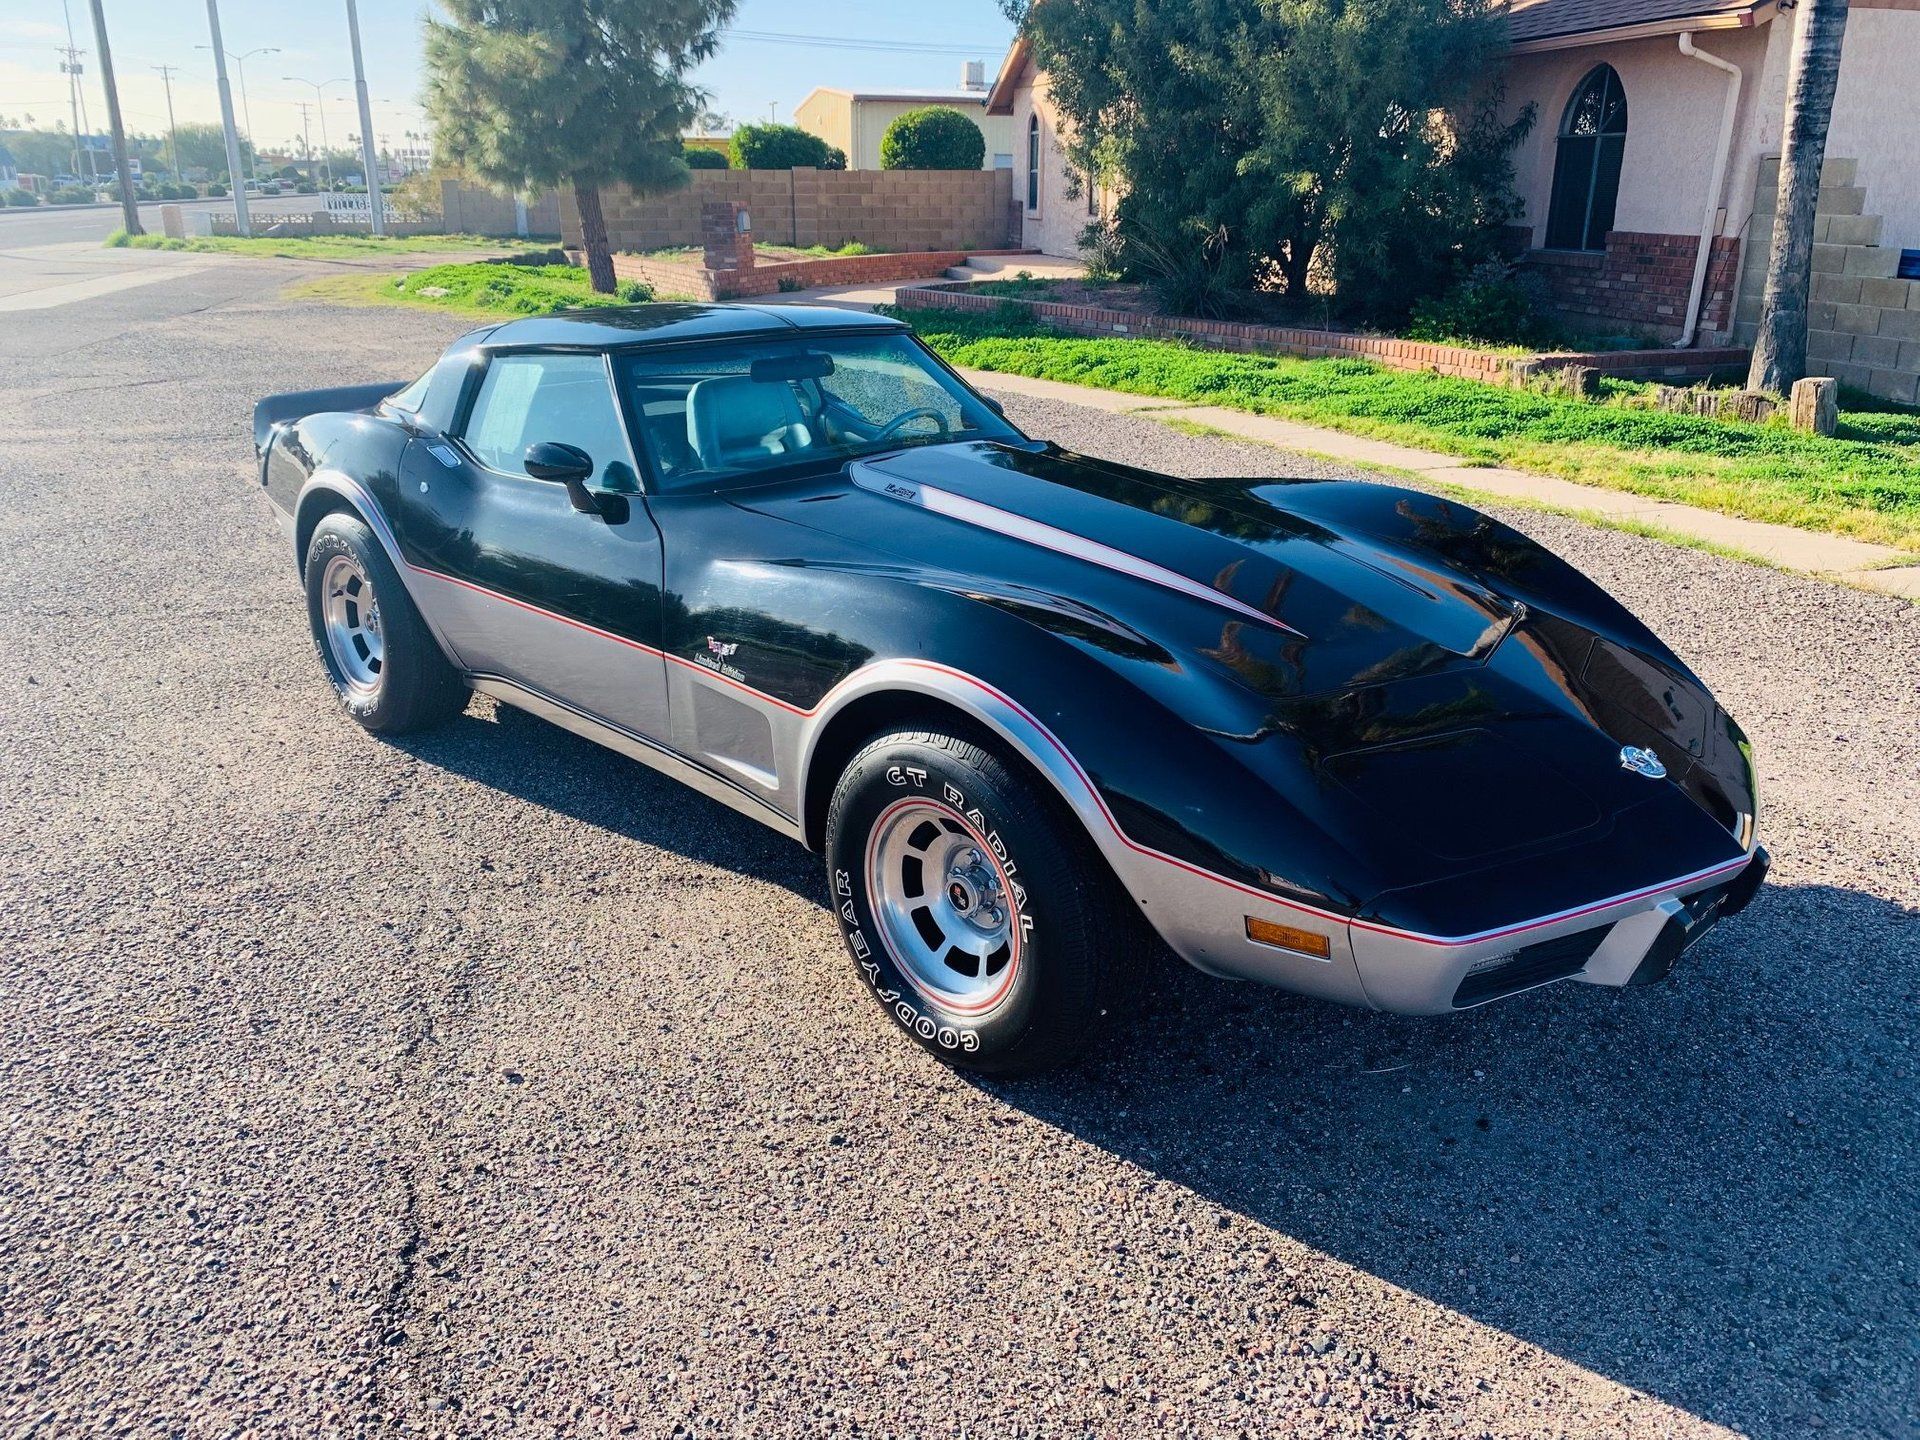 Own A 1978 Chevy Corvette Anniversary Pace Car With 14 Actual Miles